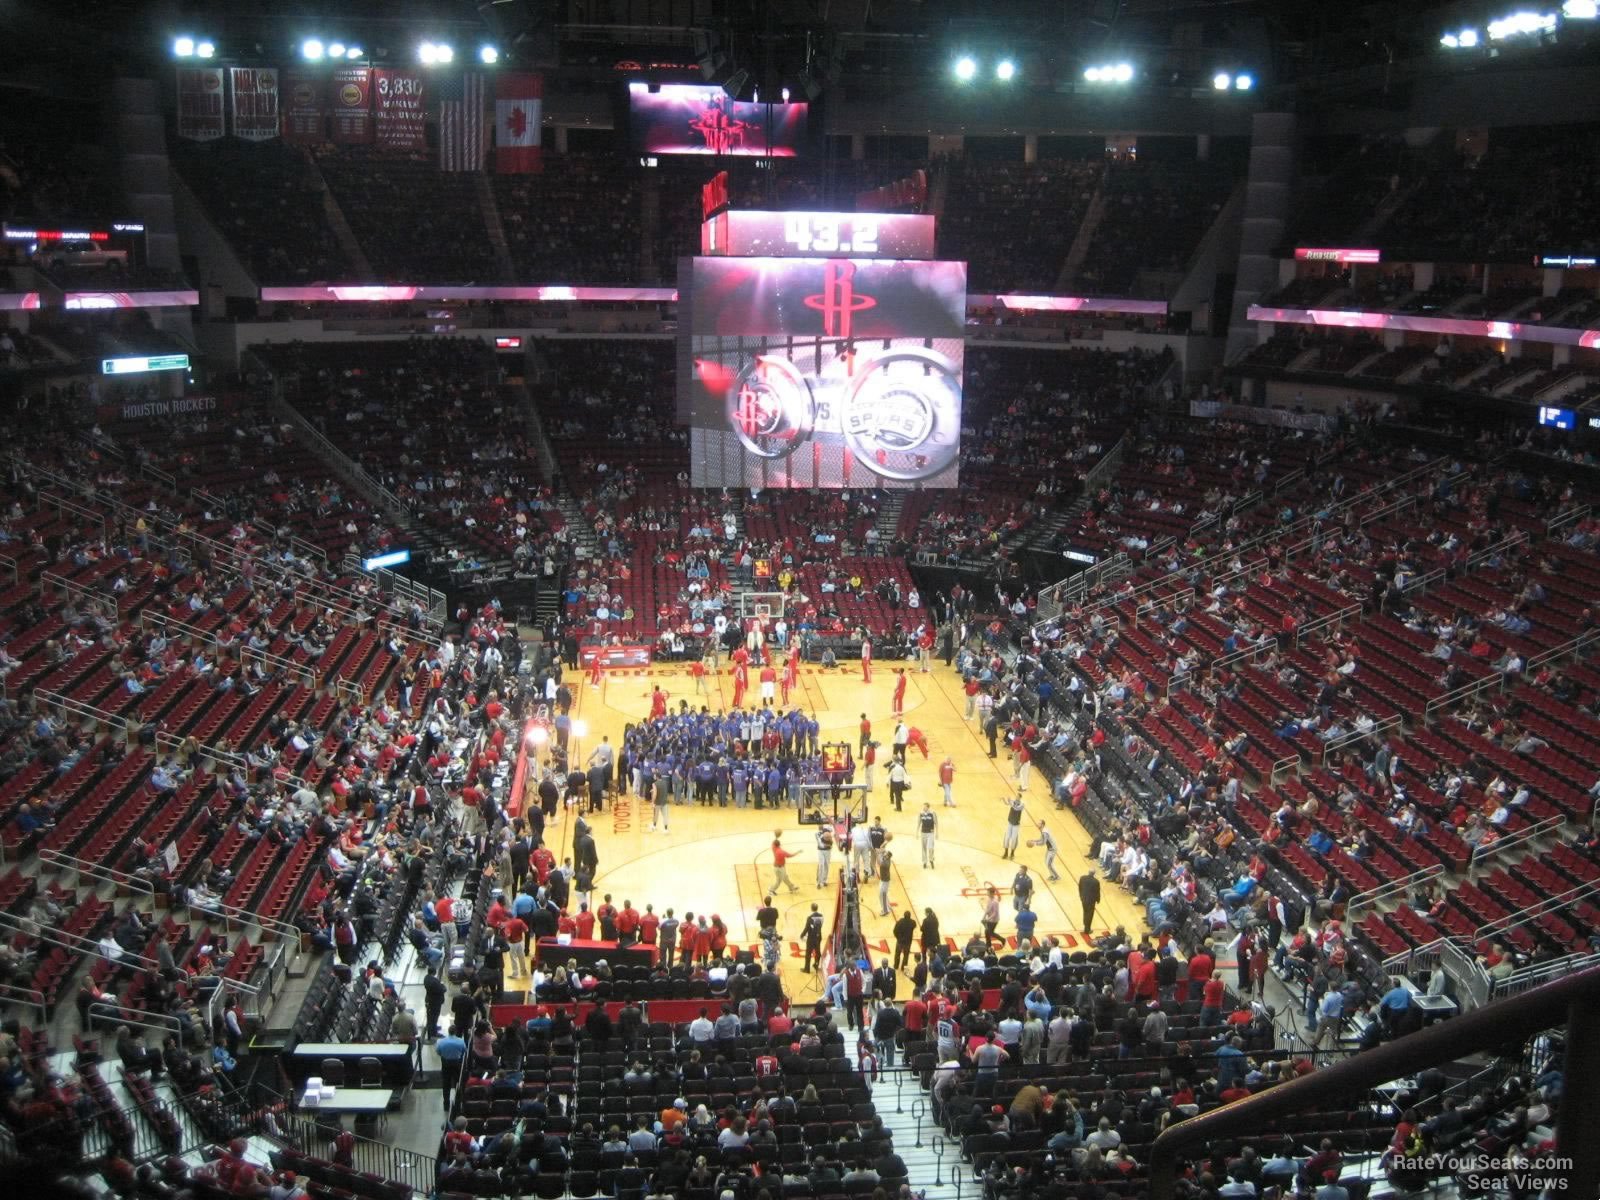 section 419, row 5 seat view  for basketball - toyota center